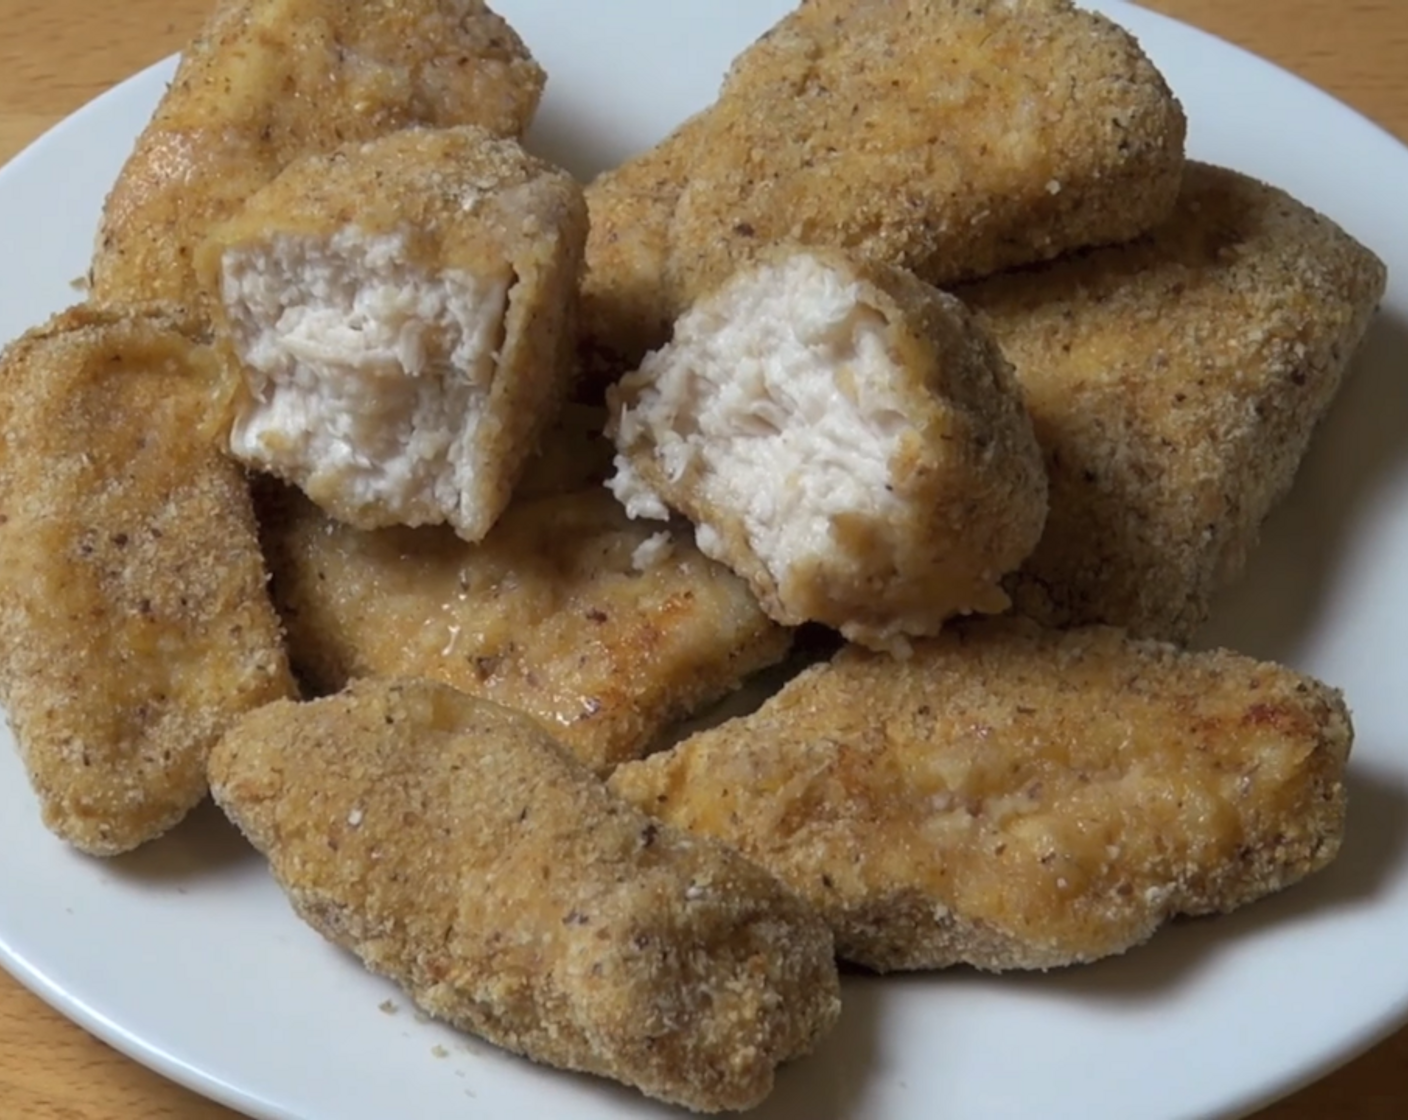 Spicy Chicken Nuggets Recipe: How to Make It